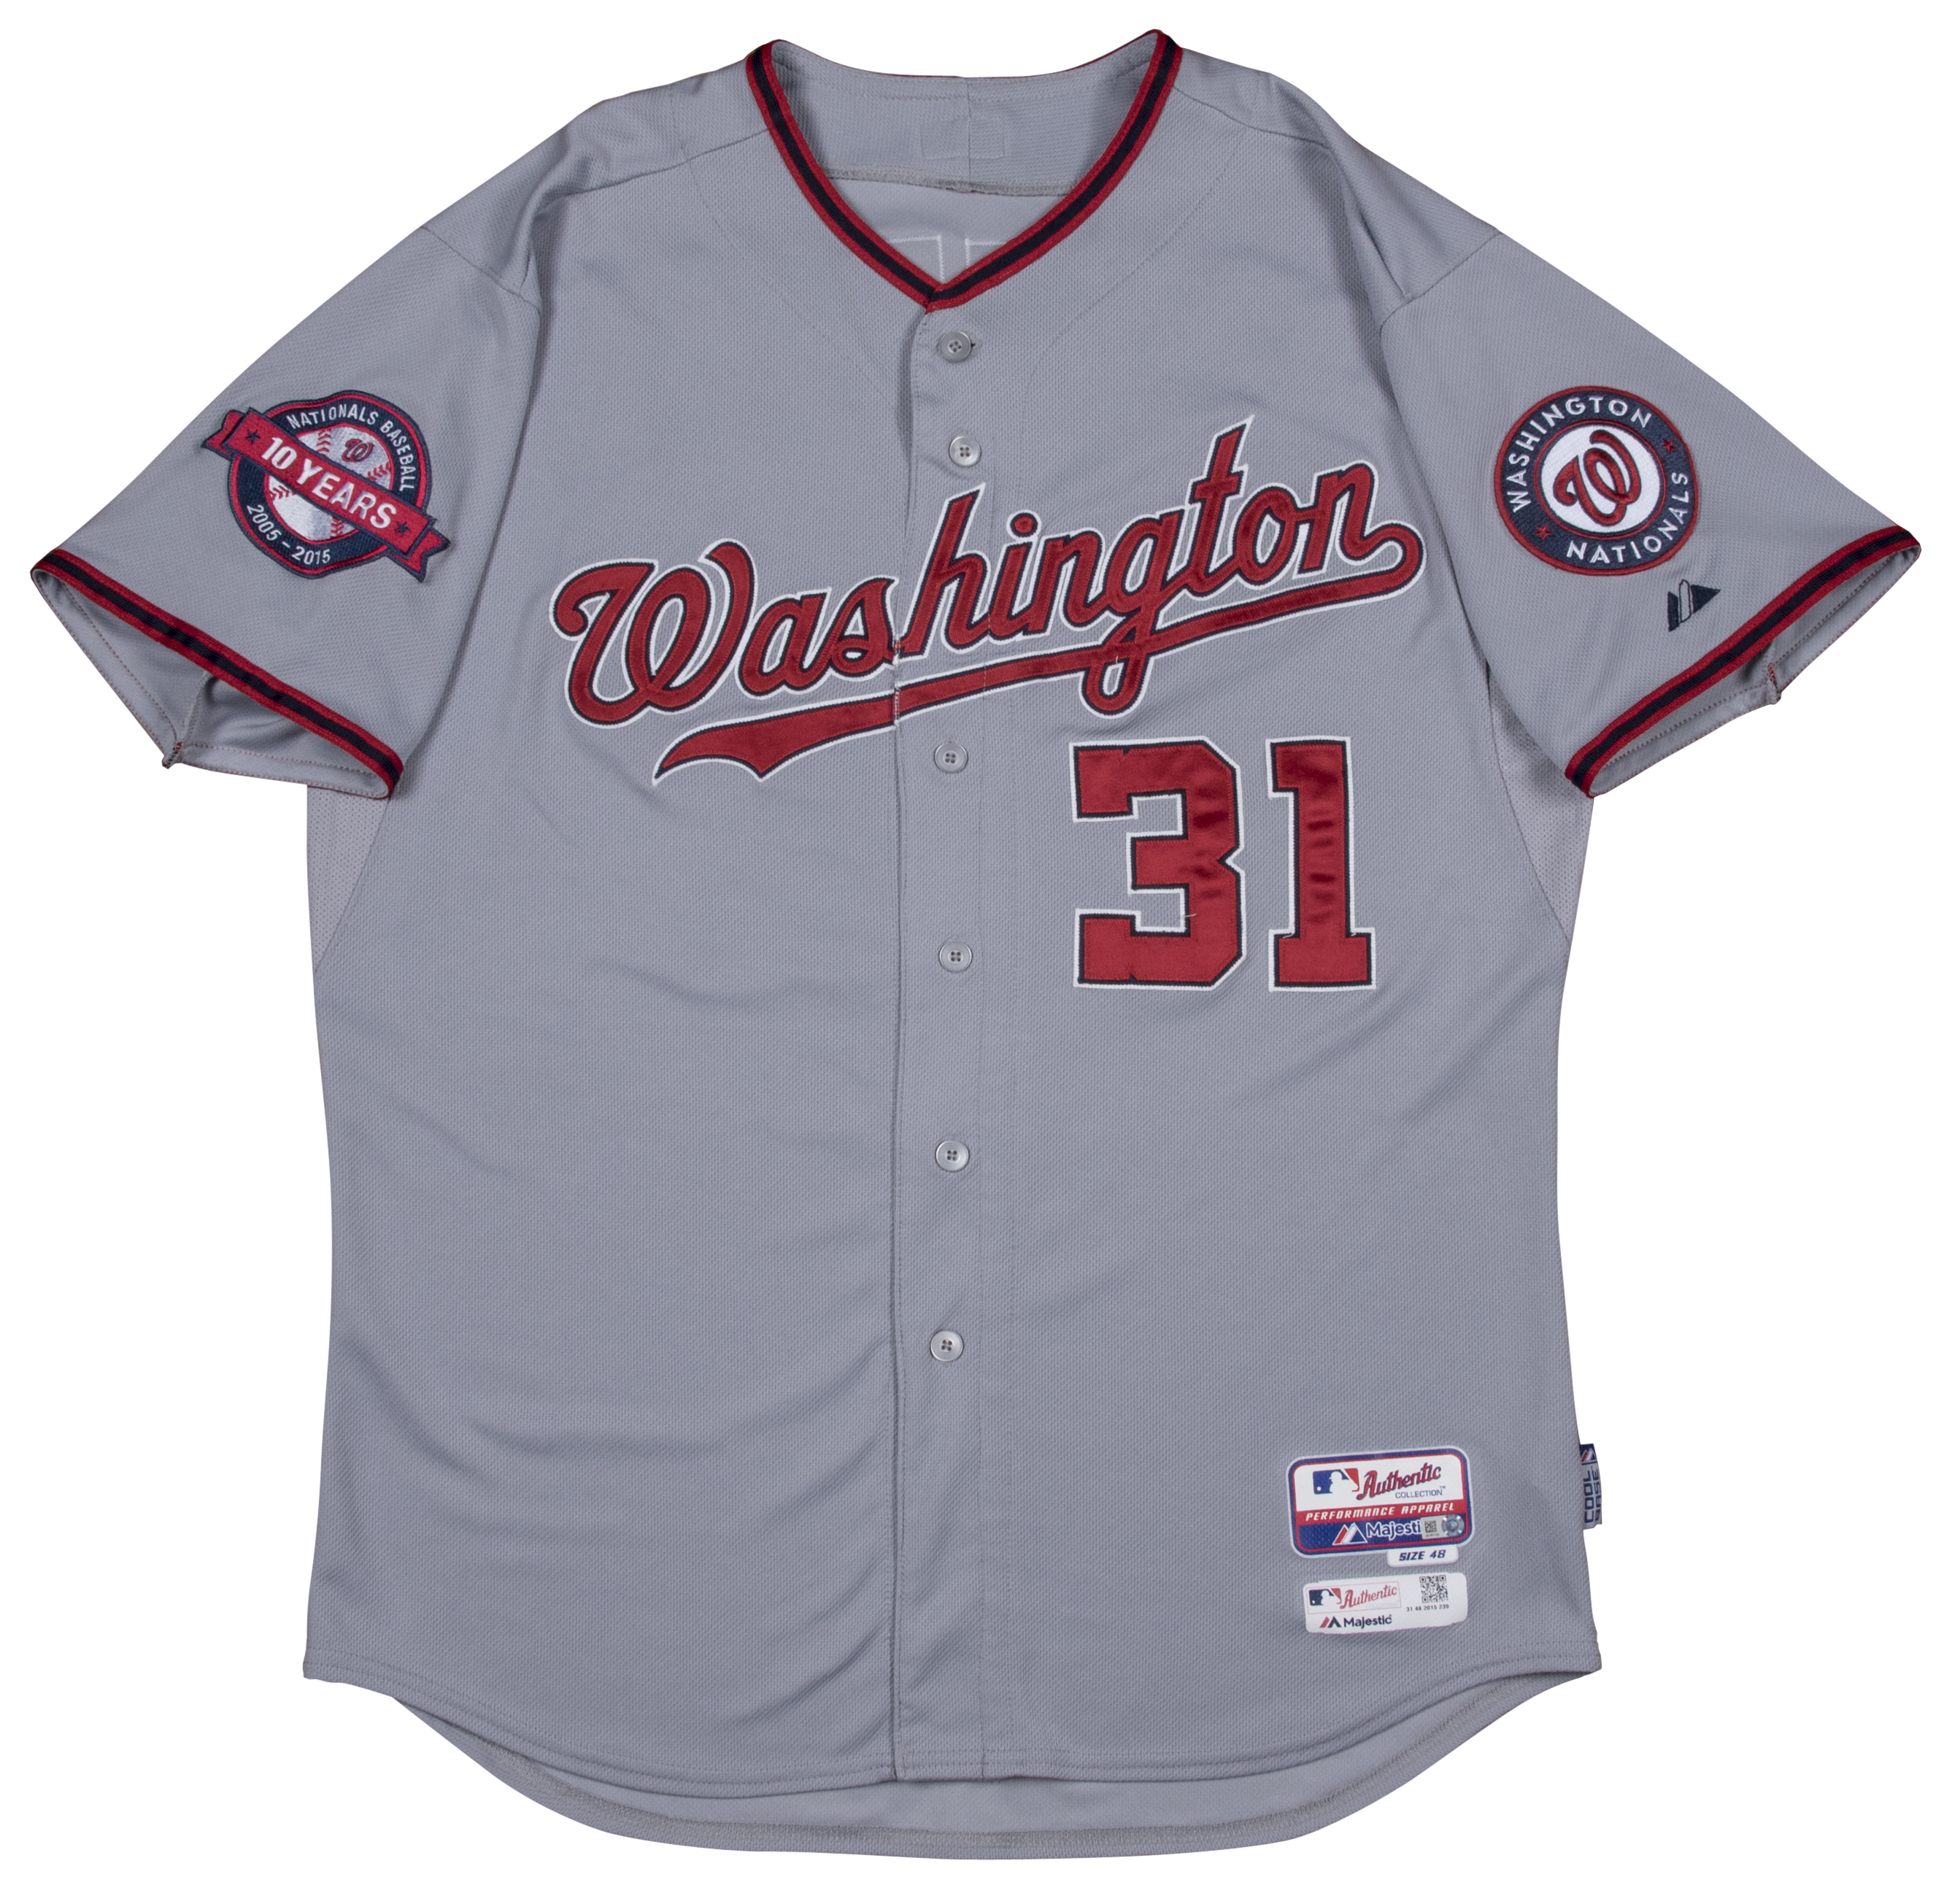 nationals road jersey